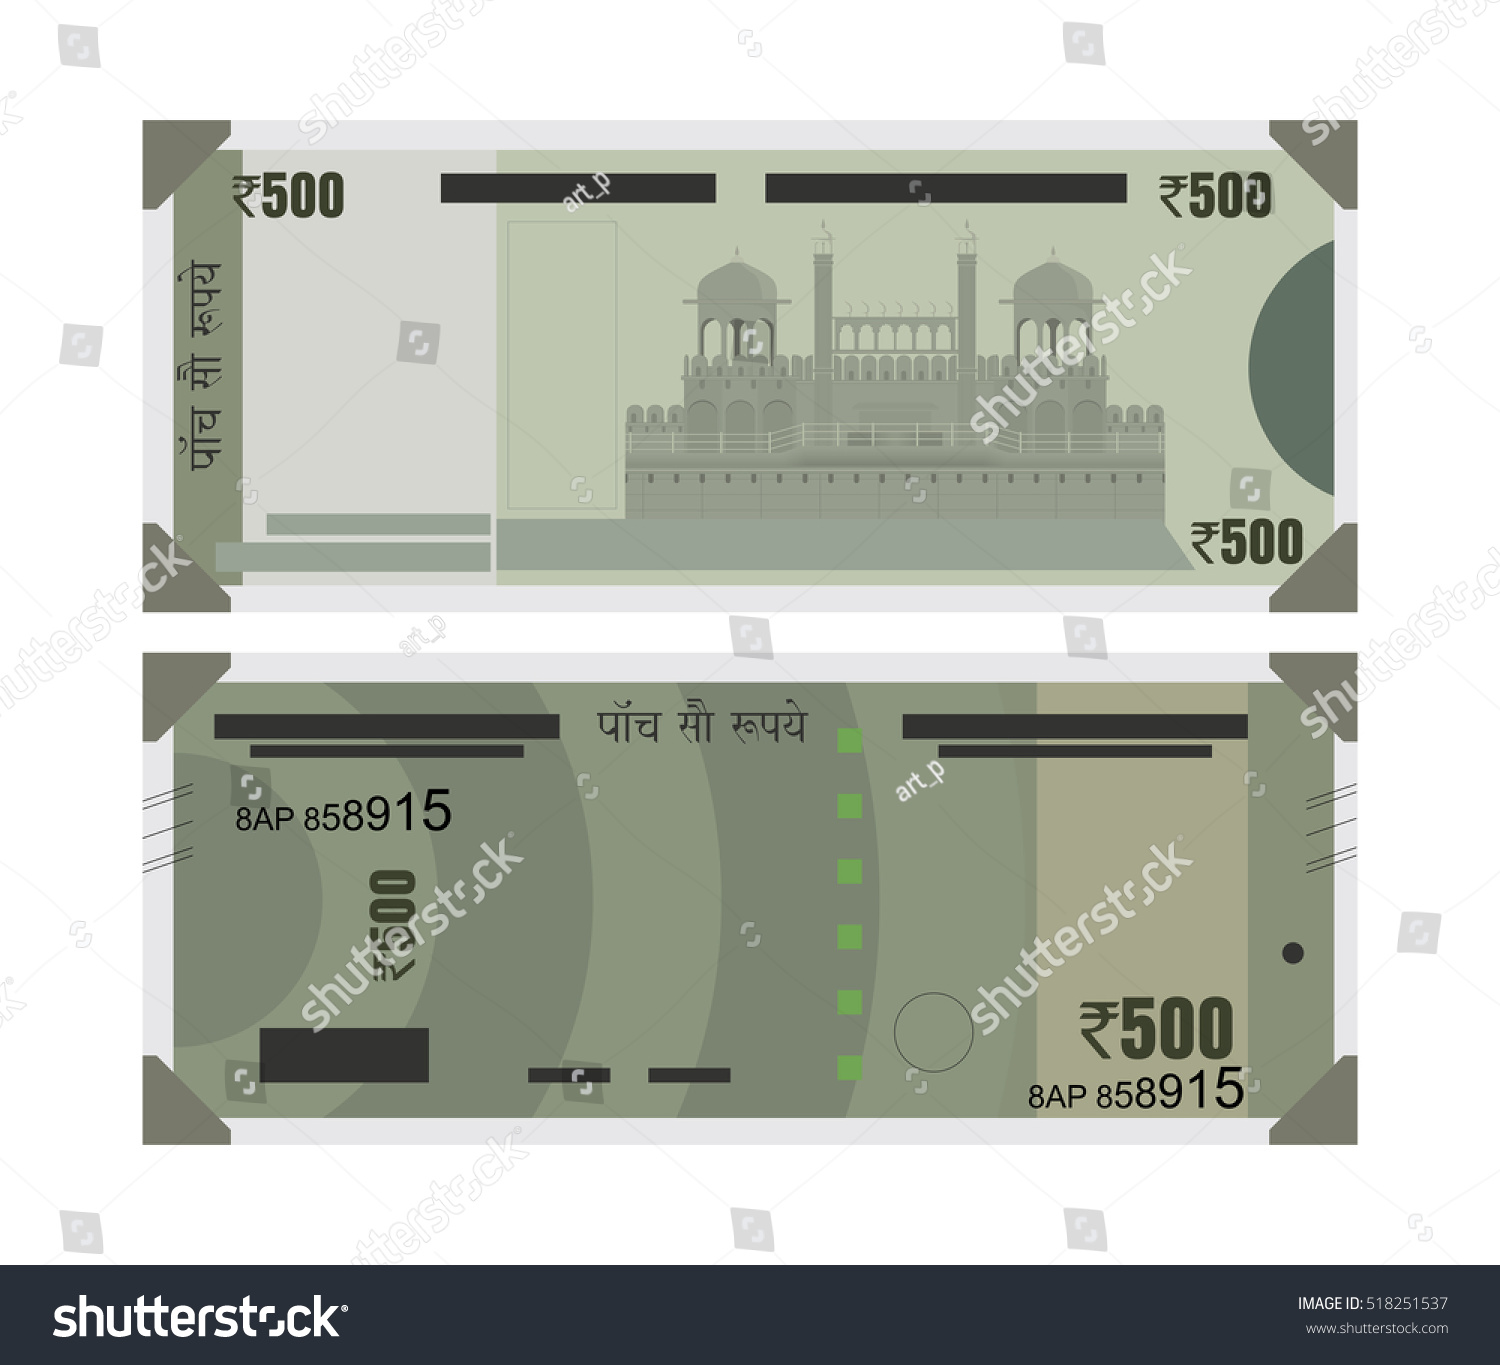 SVG of Graphical Representation of new Rs. 500 Indian Currency Note svg